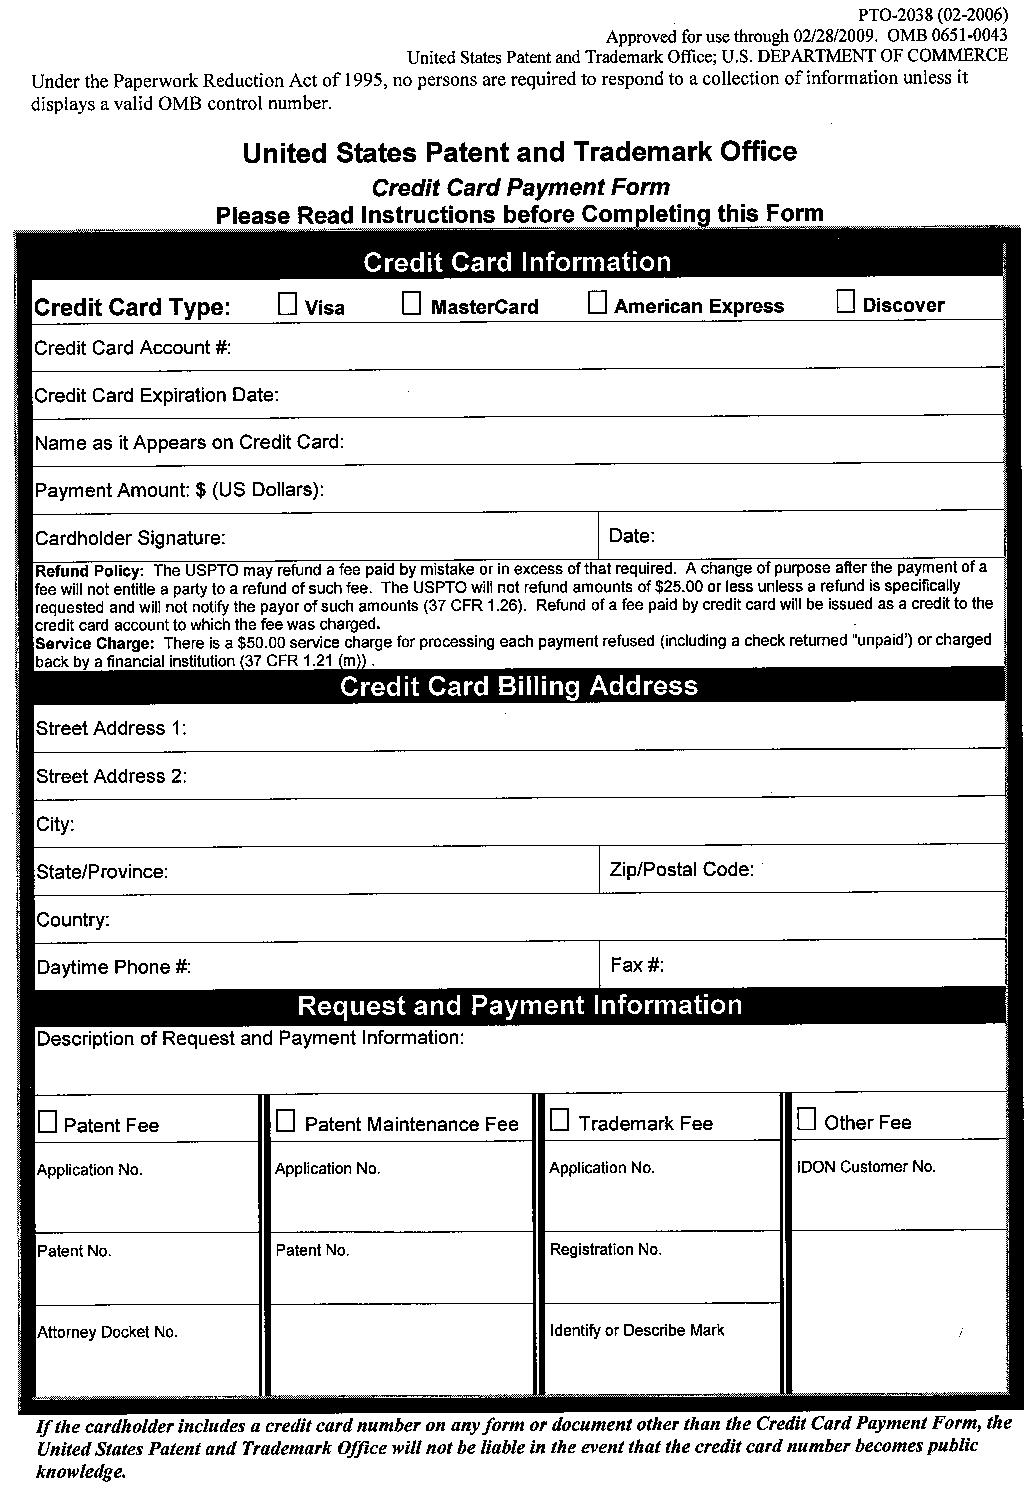 <b>Form PTO-2038. Credit Card Payment Form</b>